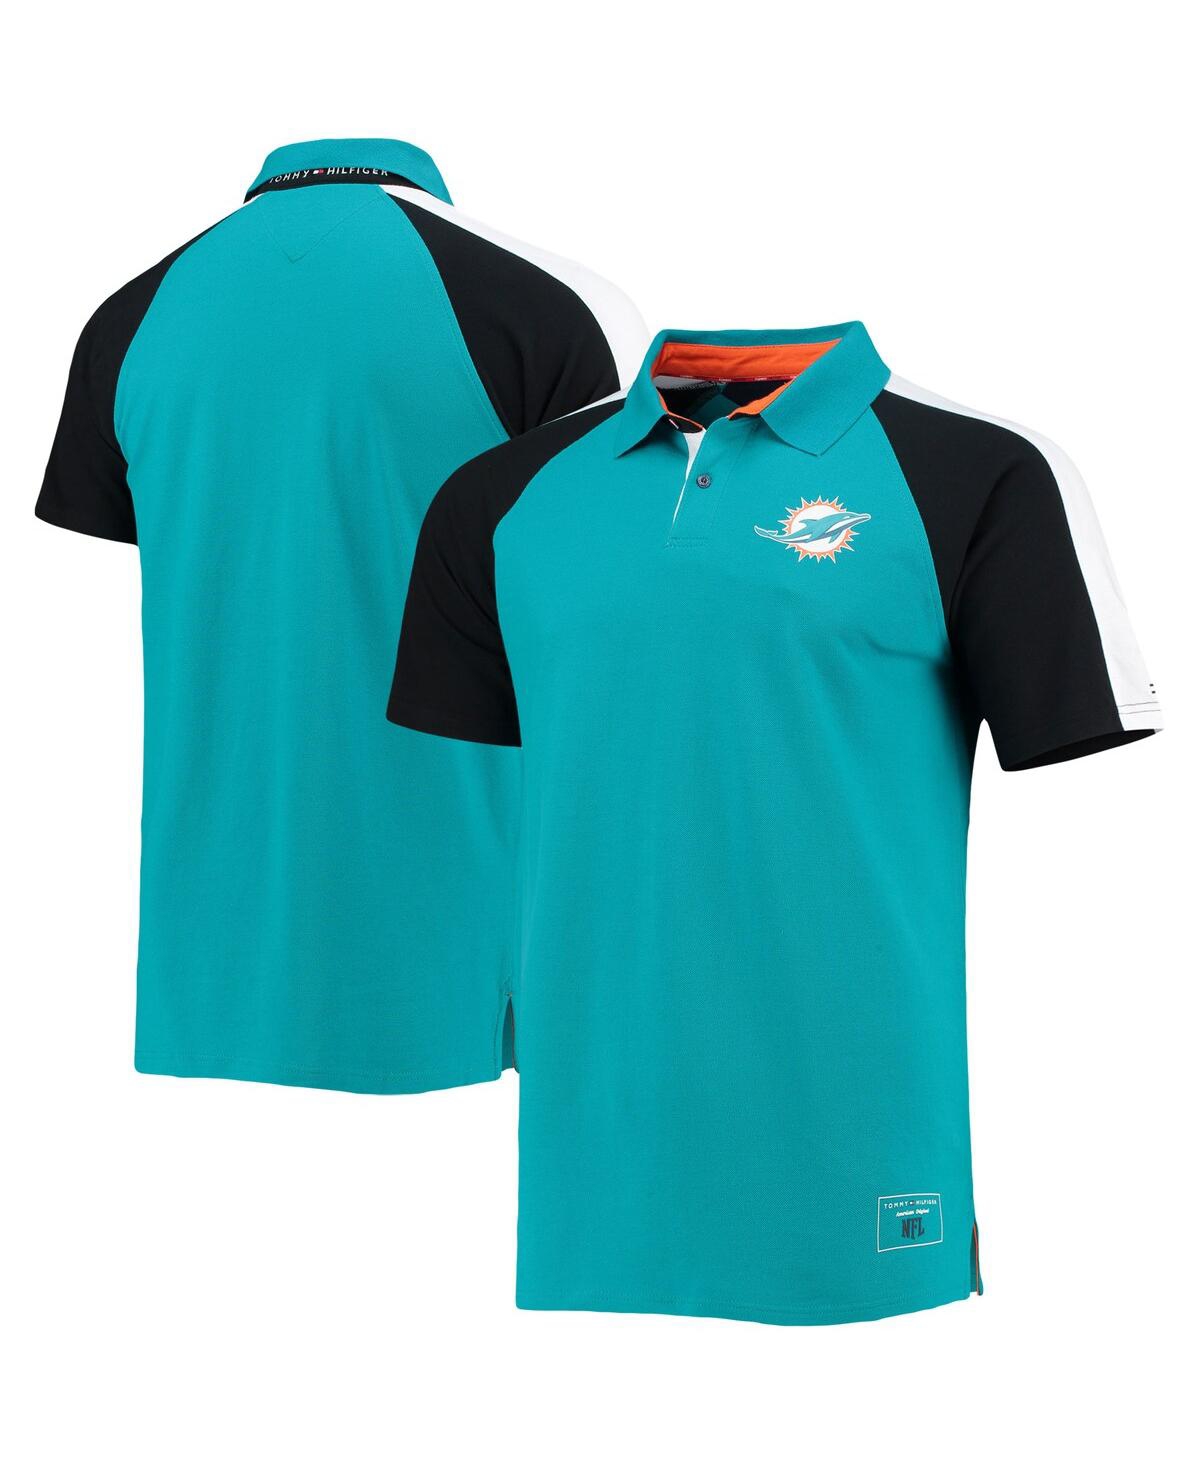 UPC 195195410533 product image for Men's Tommy Hilfiger Aqua and White Miami Dolphins Holden Raglan Polo Shirt | upcitemdb.com